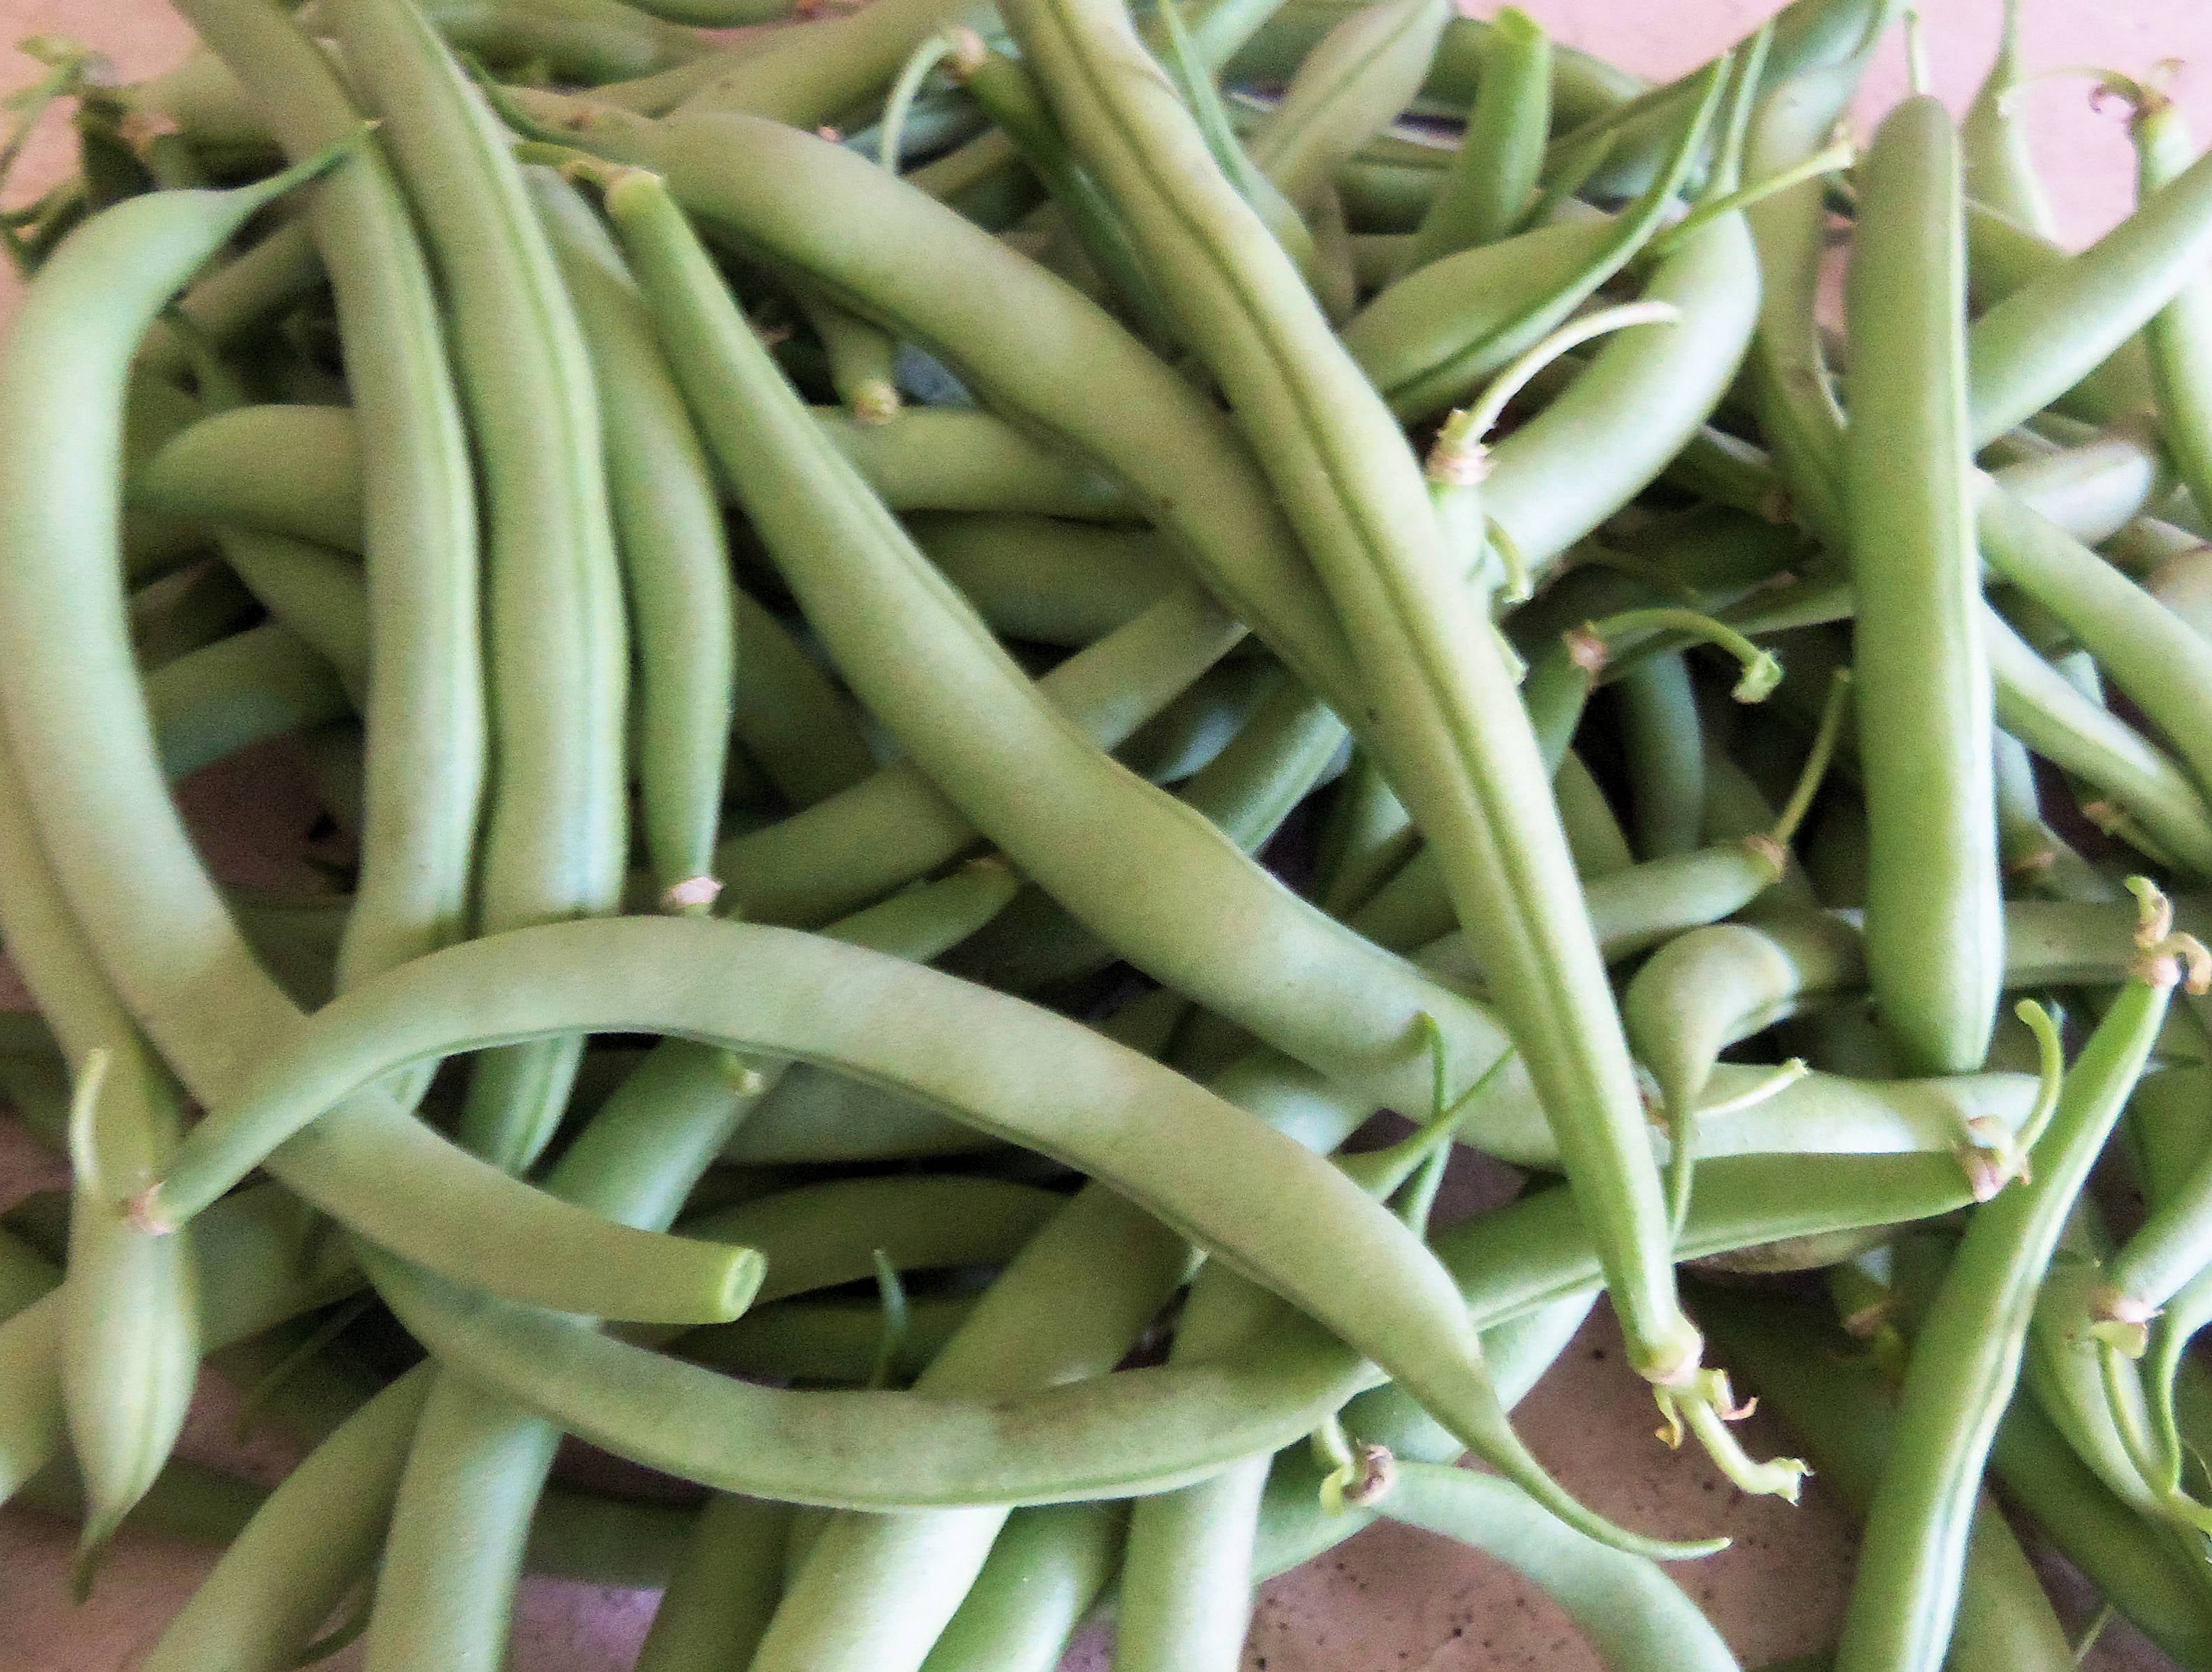 Great Yields Free Ship freezing or canning Good for fresh use Big Boy Cowpea 